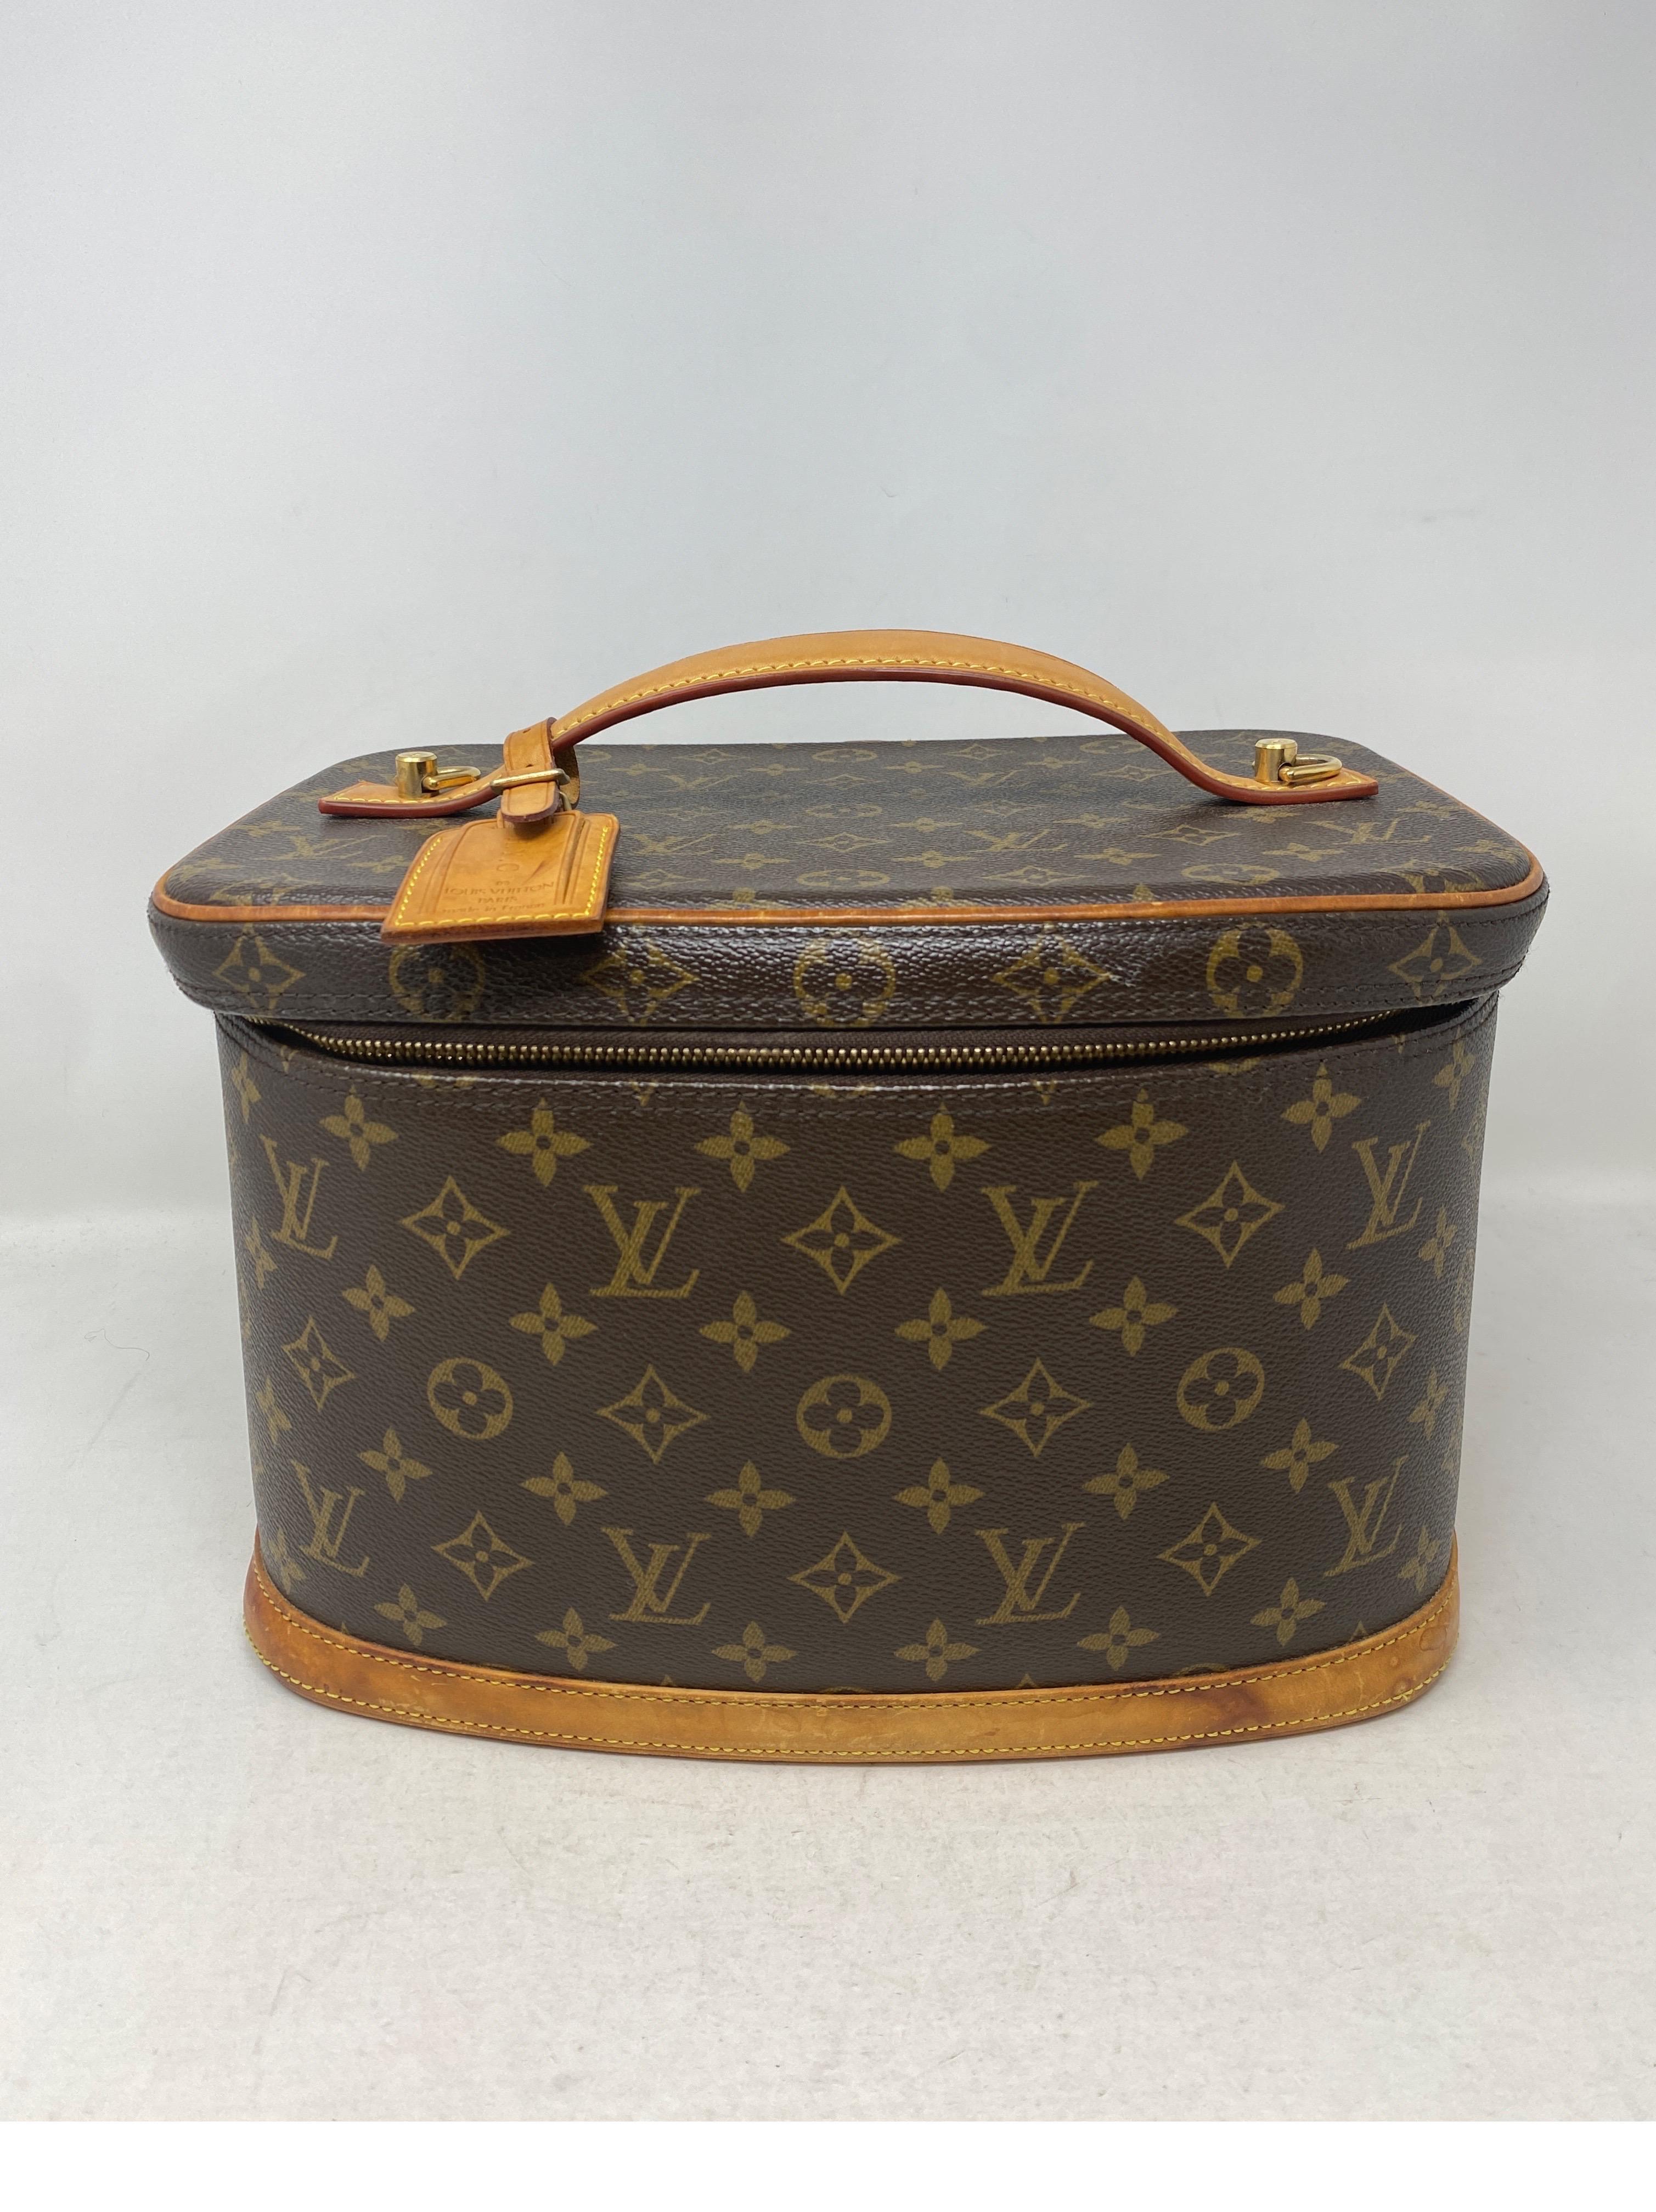 Louis Vuitton Cosmetic Train Case Bag. Vintage Louis Vuitton monogram soft train case. Rare collector's piece. Light wear throughout. Dark patina spots on leather. Interior clean. Great travel bag. Guaranteed authentic. 